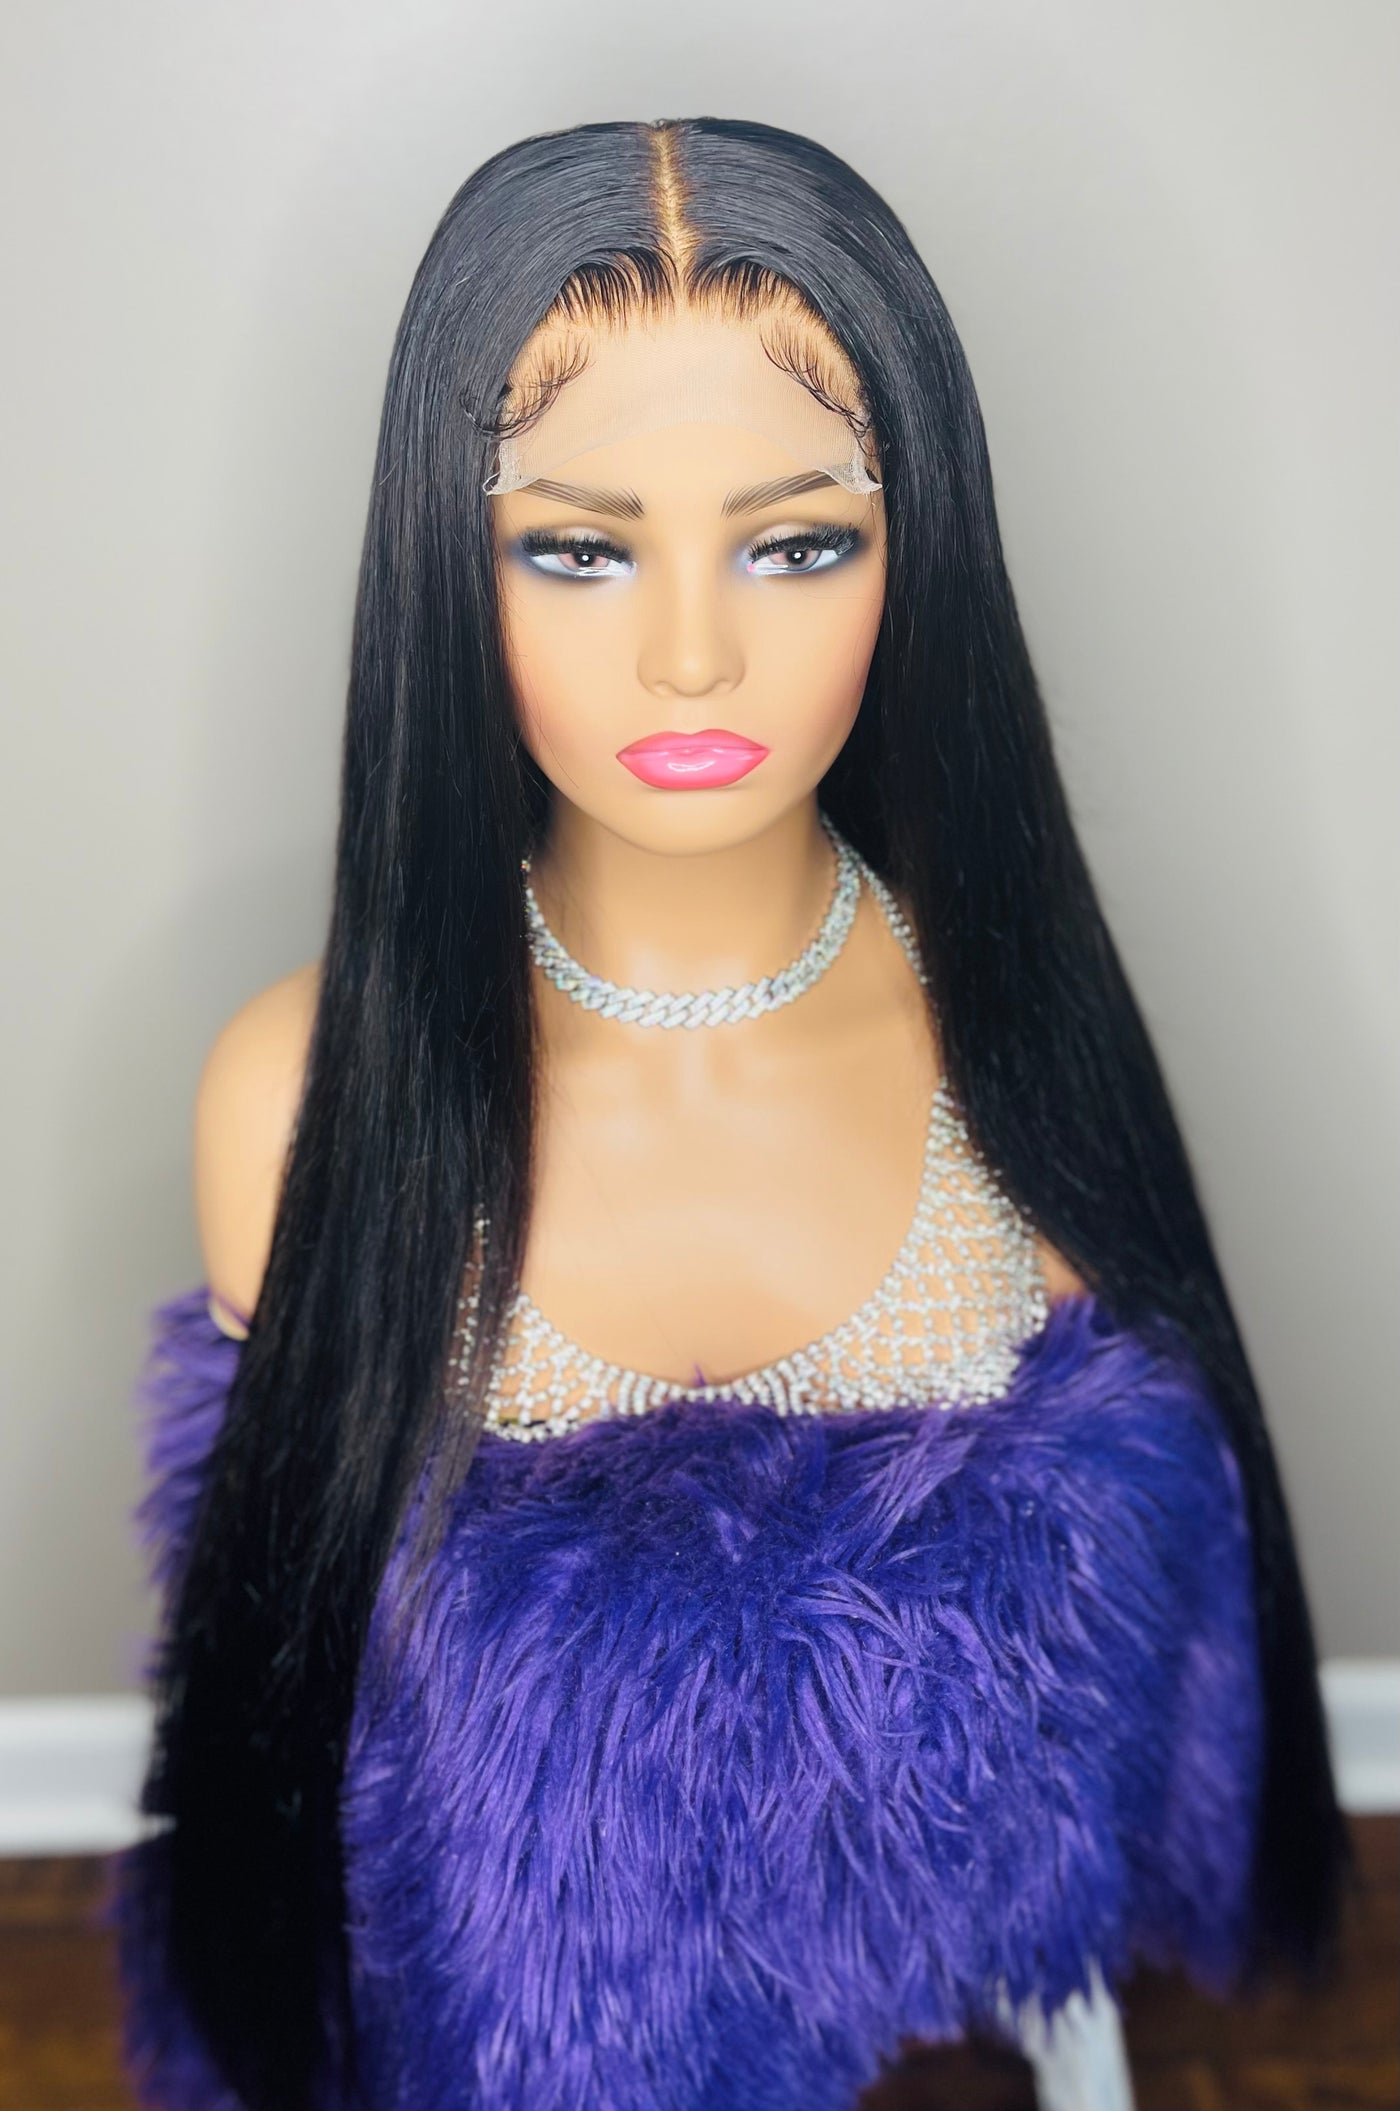 Achieve an Effortless Look with our Virgin Brazilian Lace Closure Wig